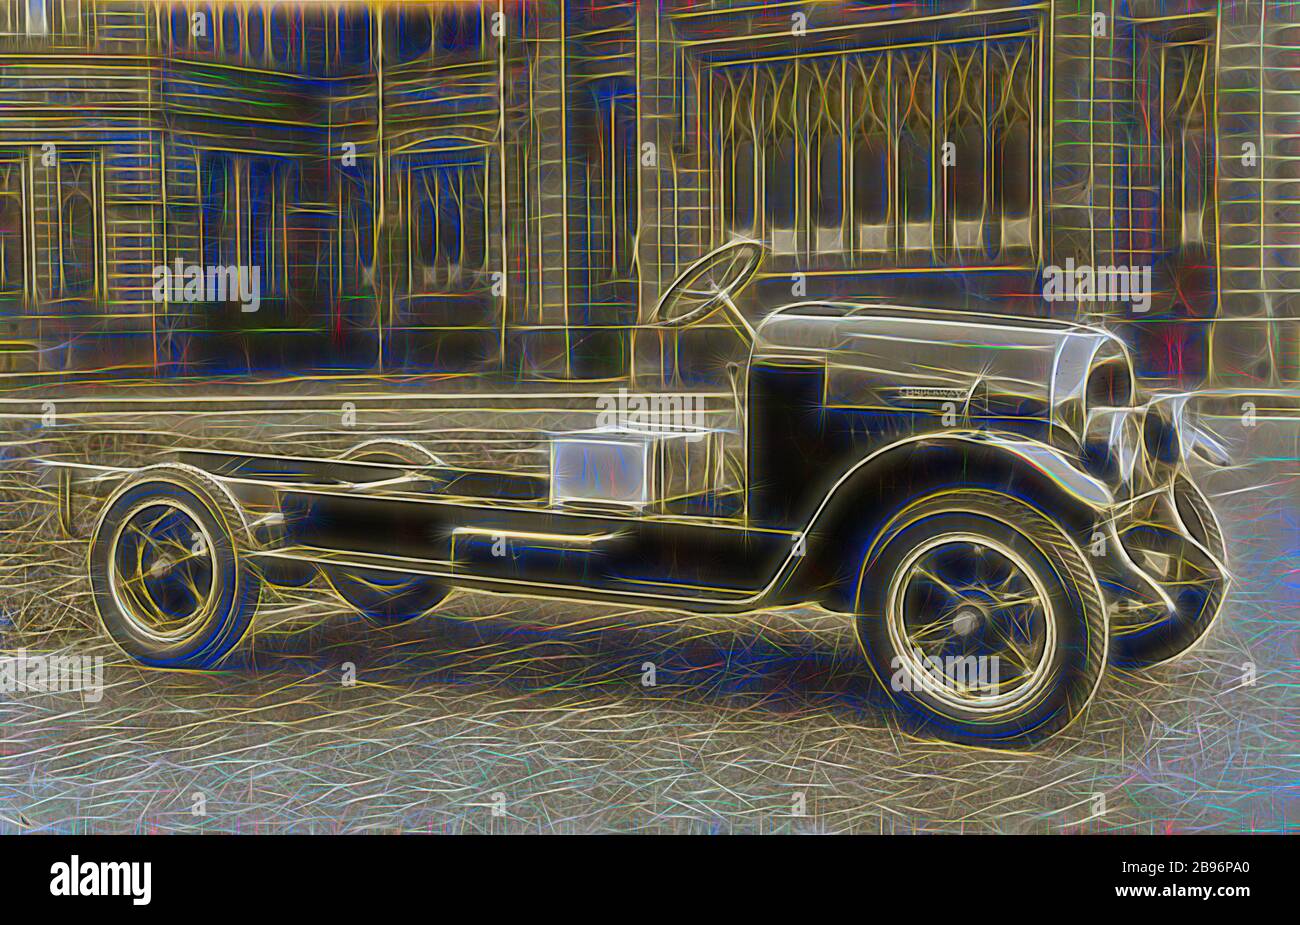 Photograph - Brockway Motors Ltd, Brockway Junior Truck, Sydney, New South Wales, circa 1927, Image from a photograph album containing twenty one photographs of motor trucks. The album was used by Brockway Motors Ltd., Reimagined by Gibon, design of warm cheerful glowing of brightness and light rays radiance. Classic art reinvented with a modern twist. Photography inspired by futurism, embracing dynamic energy of modern technology, movement, speed and revolutionize culture. Stock Photo